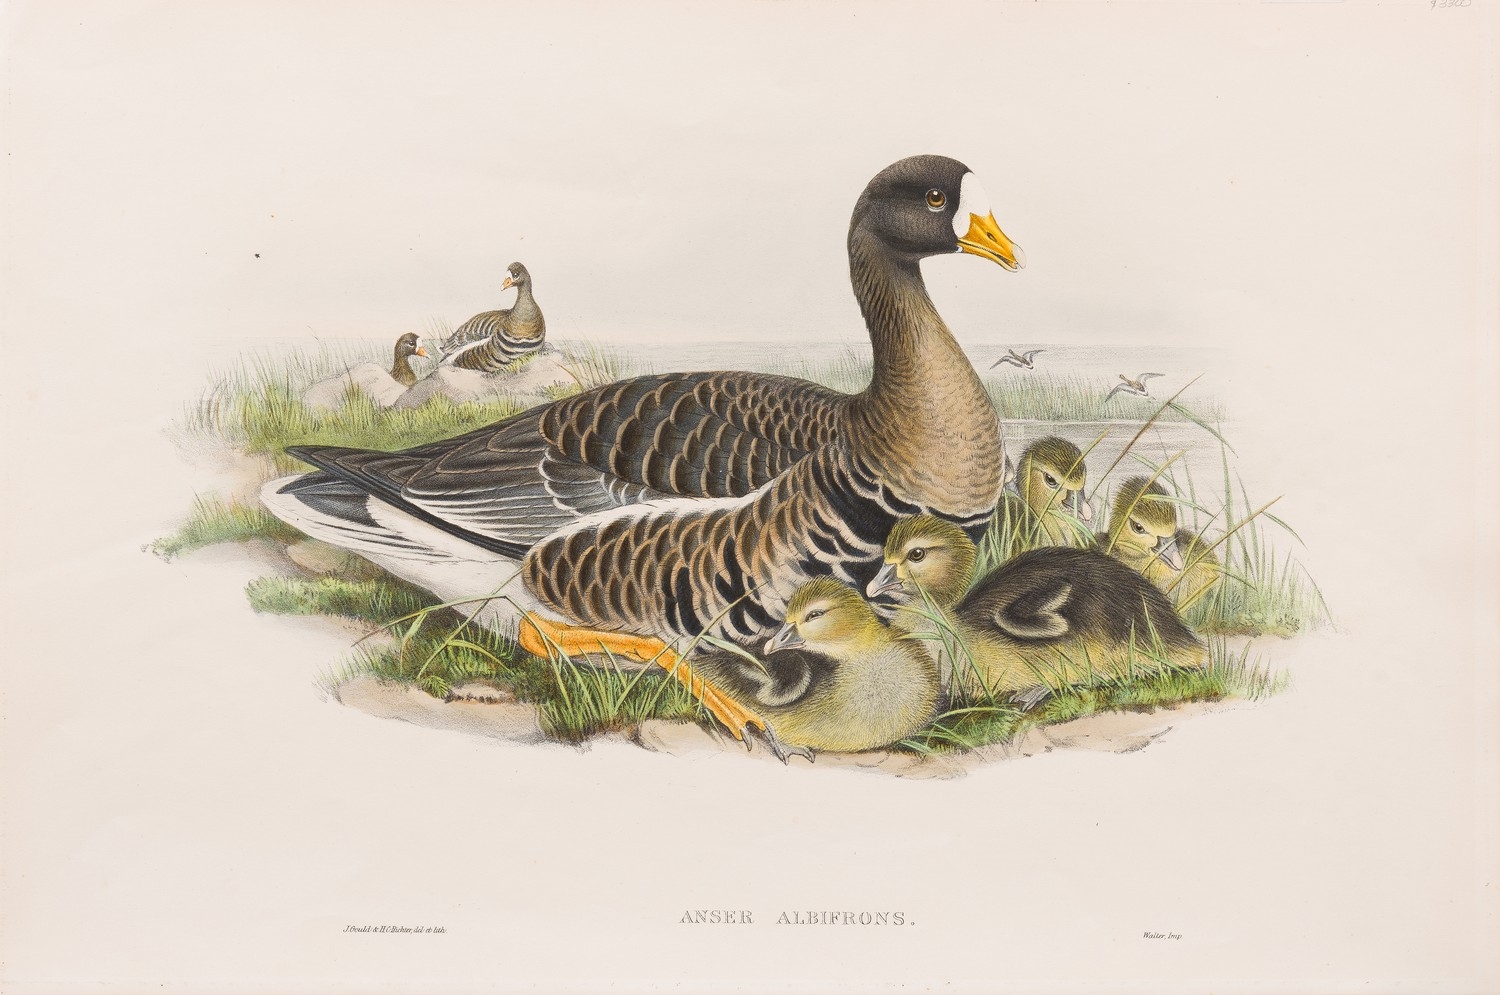 Anser Ablifrons by John Gould